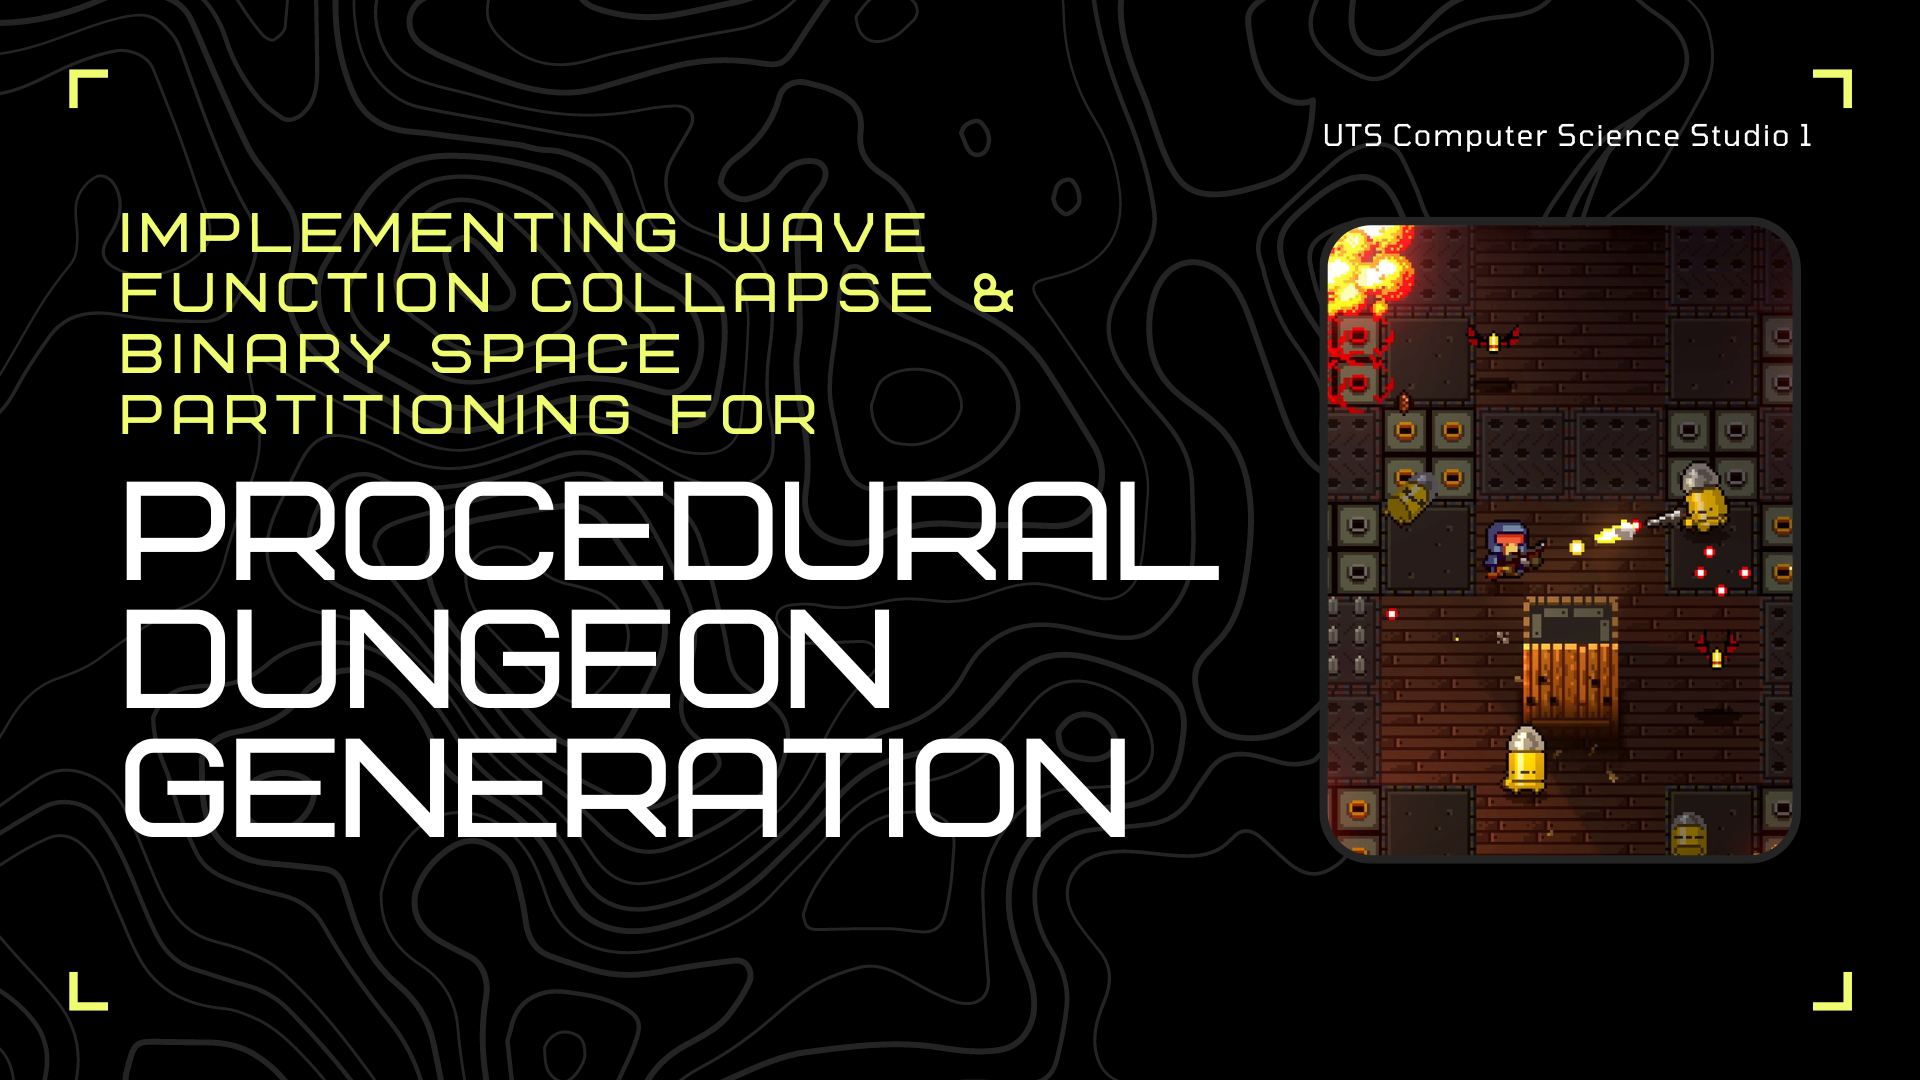 Implementing Wave Function Collapse & Binary Space Partitioning for Procedural Dungeon Generation thumbnail